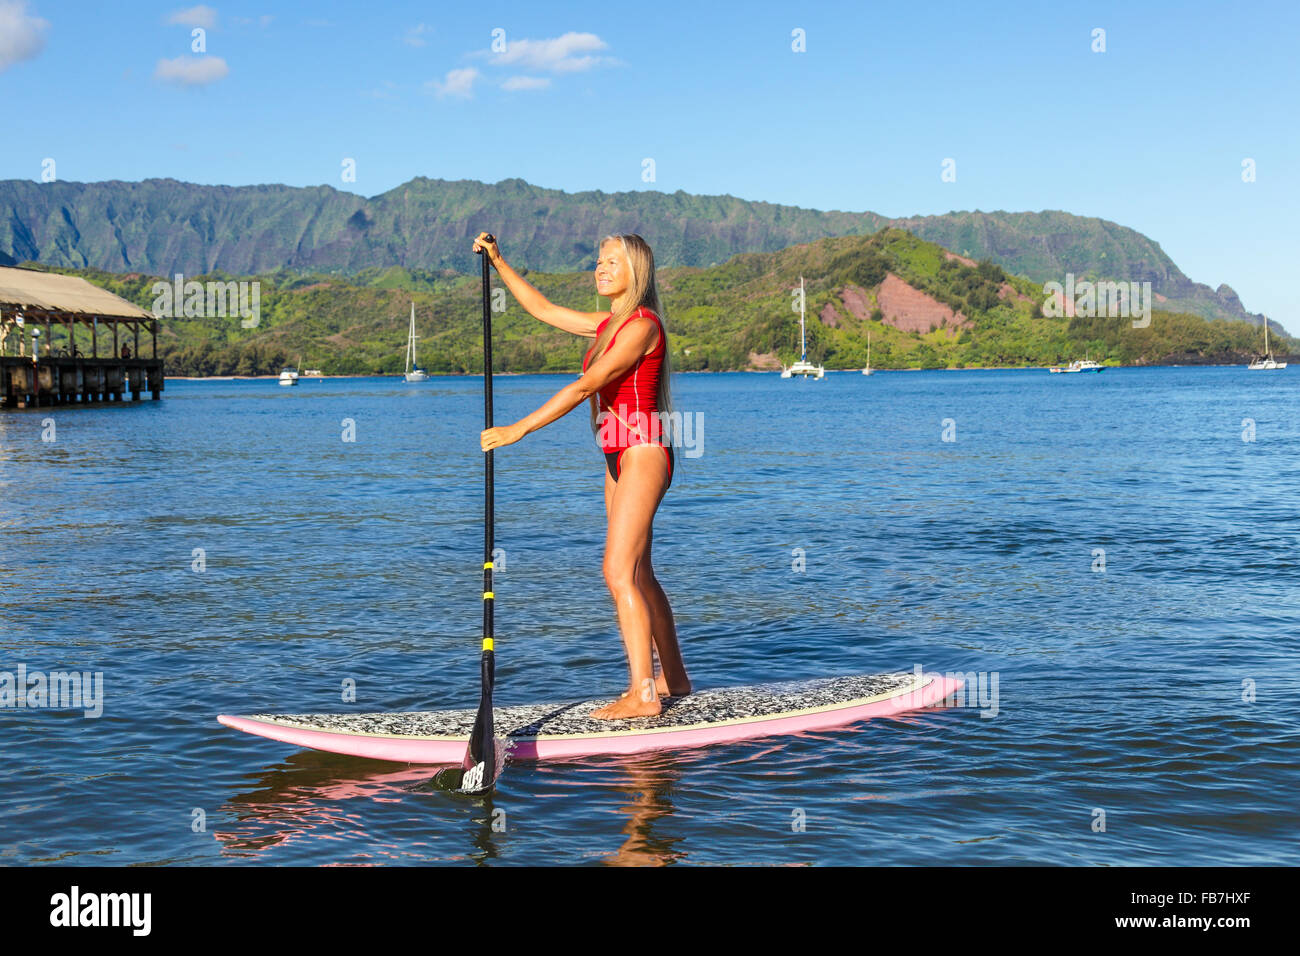 Woman on stand up paddle board in Hanalei Bay, with Mt. Makana, called Bali Hai, and the Hanalei Pier in the background Stock Photo